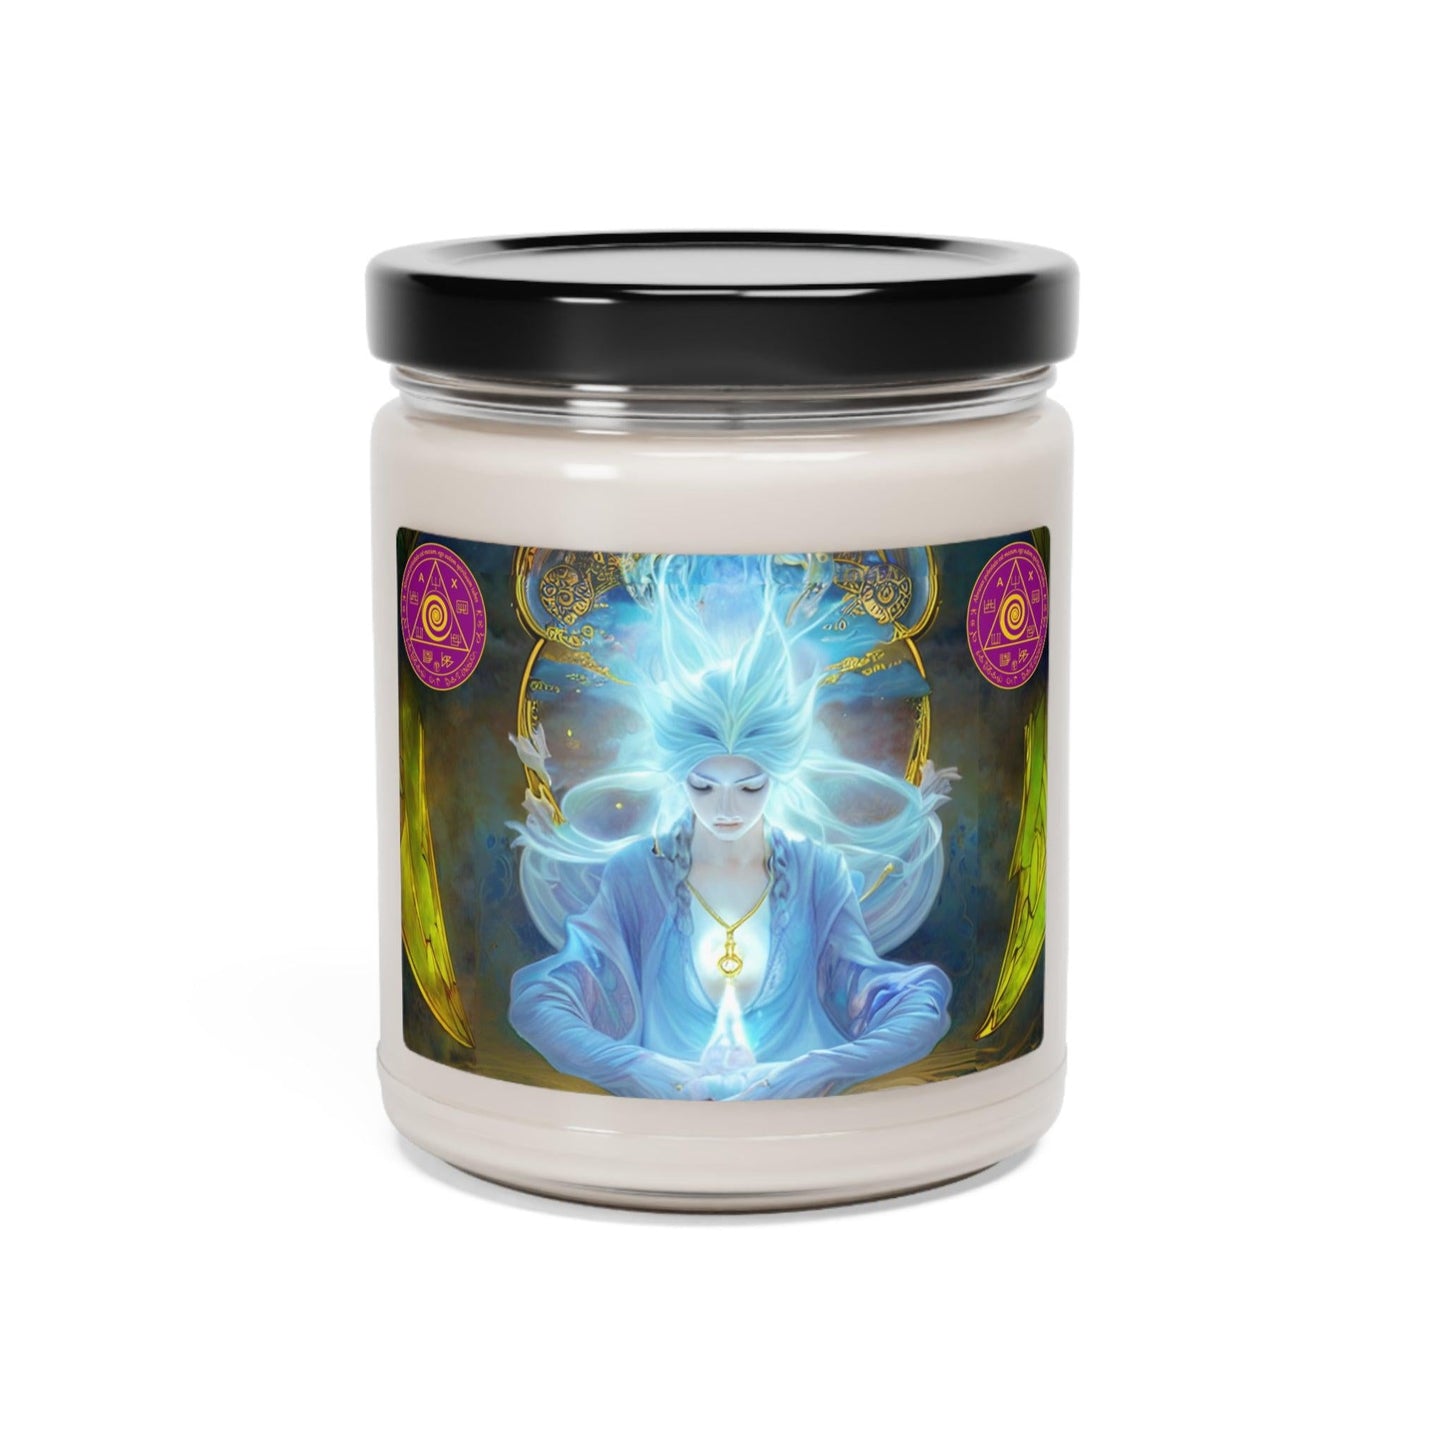 Olympic-Spirits-Cleansing-and-Protection-Scented-Soy-Candle-for-offerings-rituals-initiations-or-praying-and-meditation